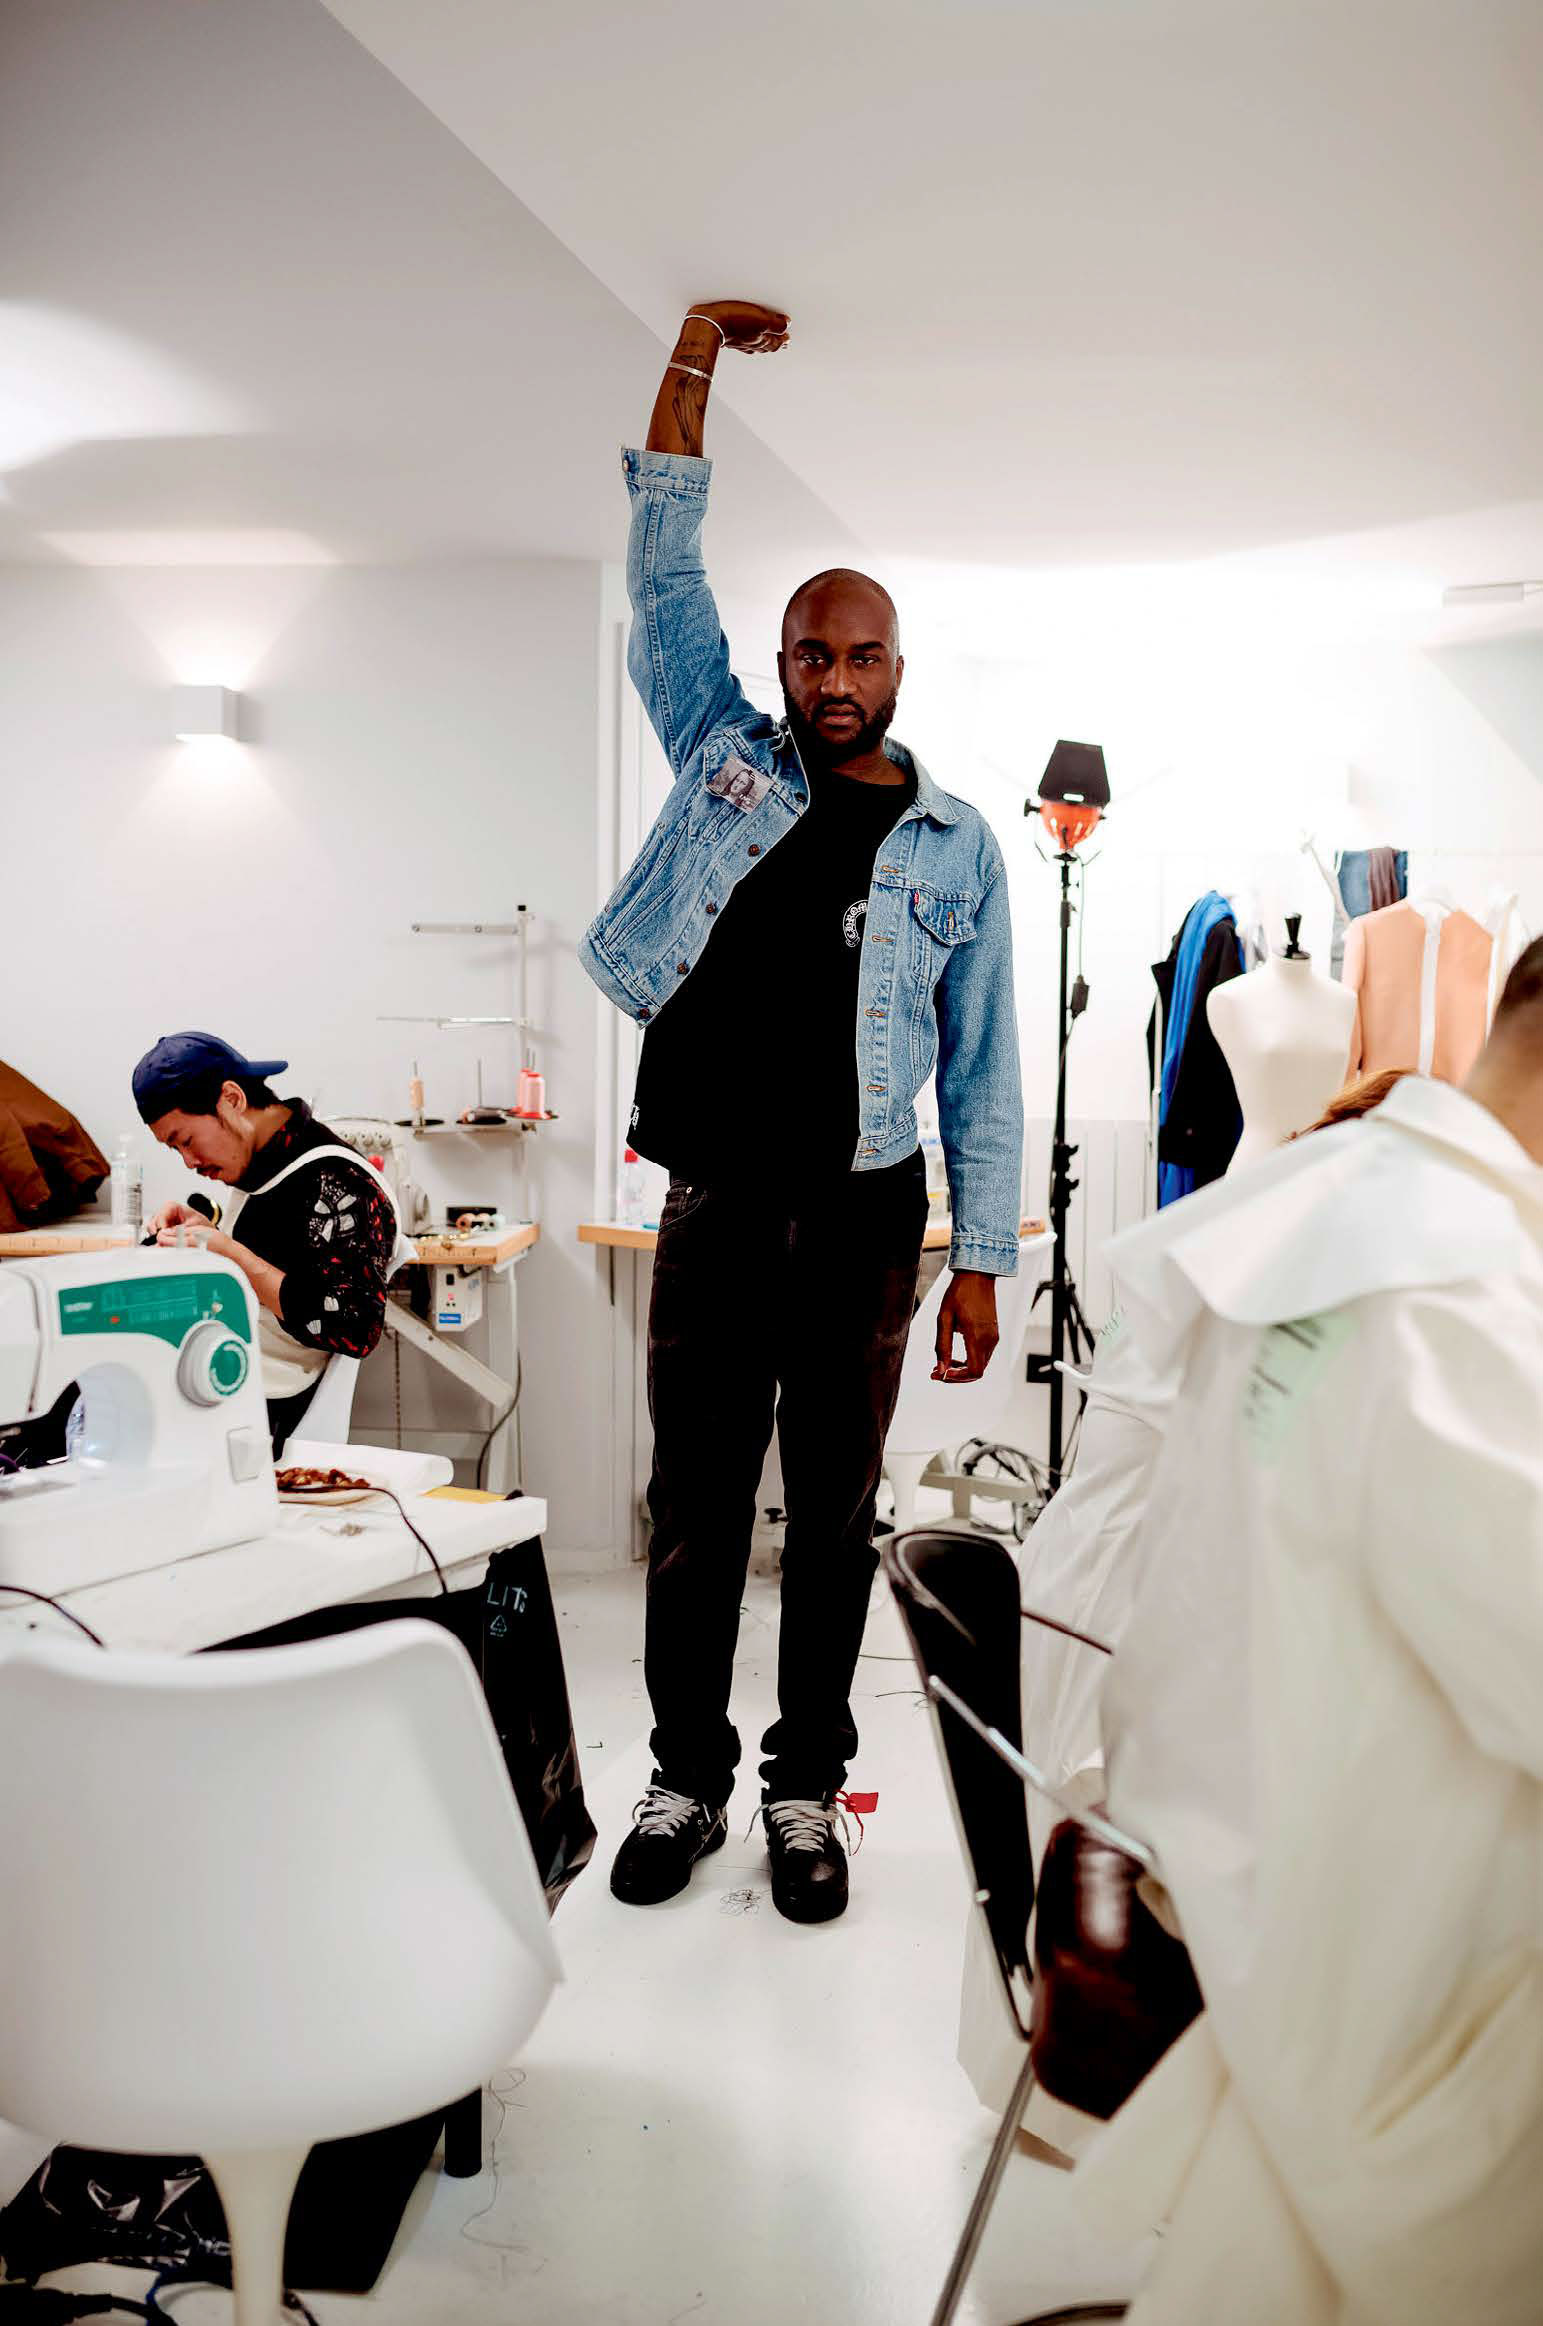 Virgil Abloh: The work Kanye West and I do is like climbing Mount Everest